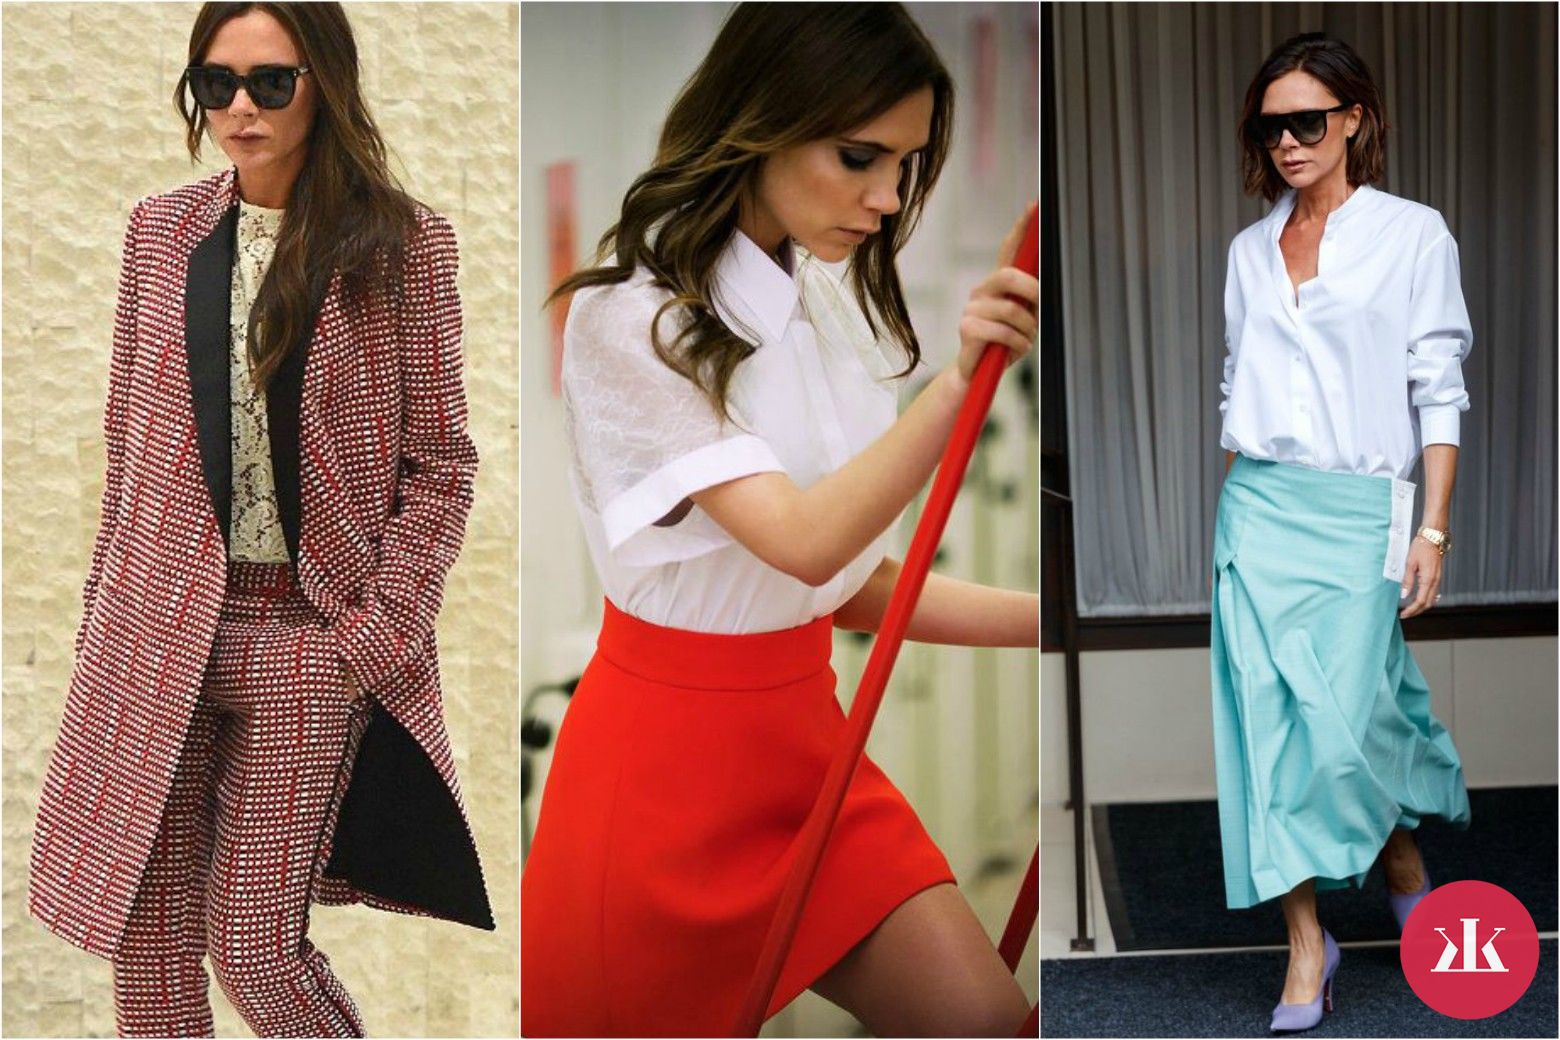 Victoria Beckham outfity